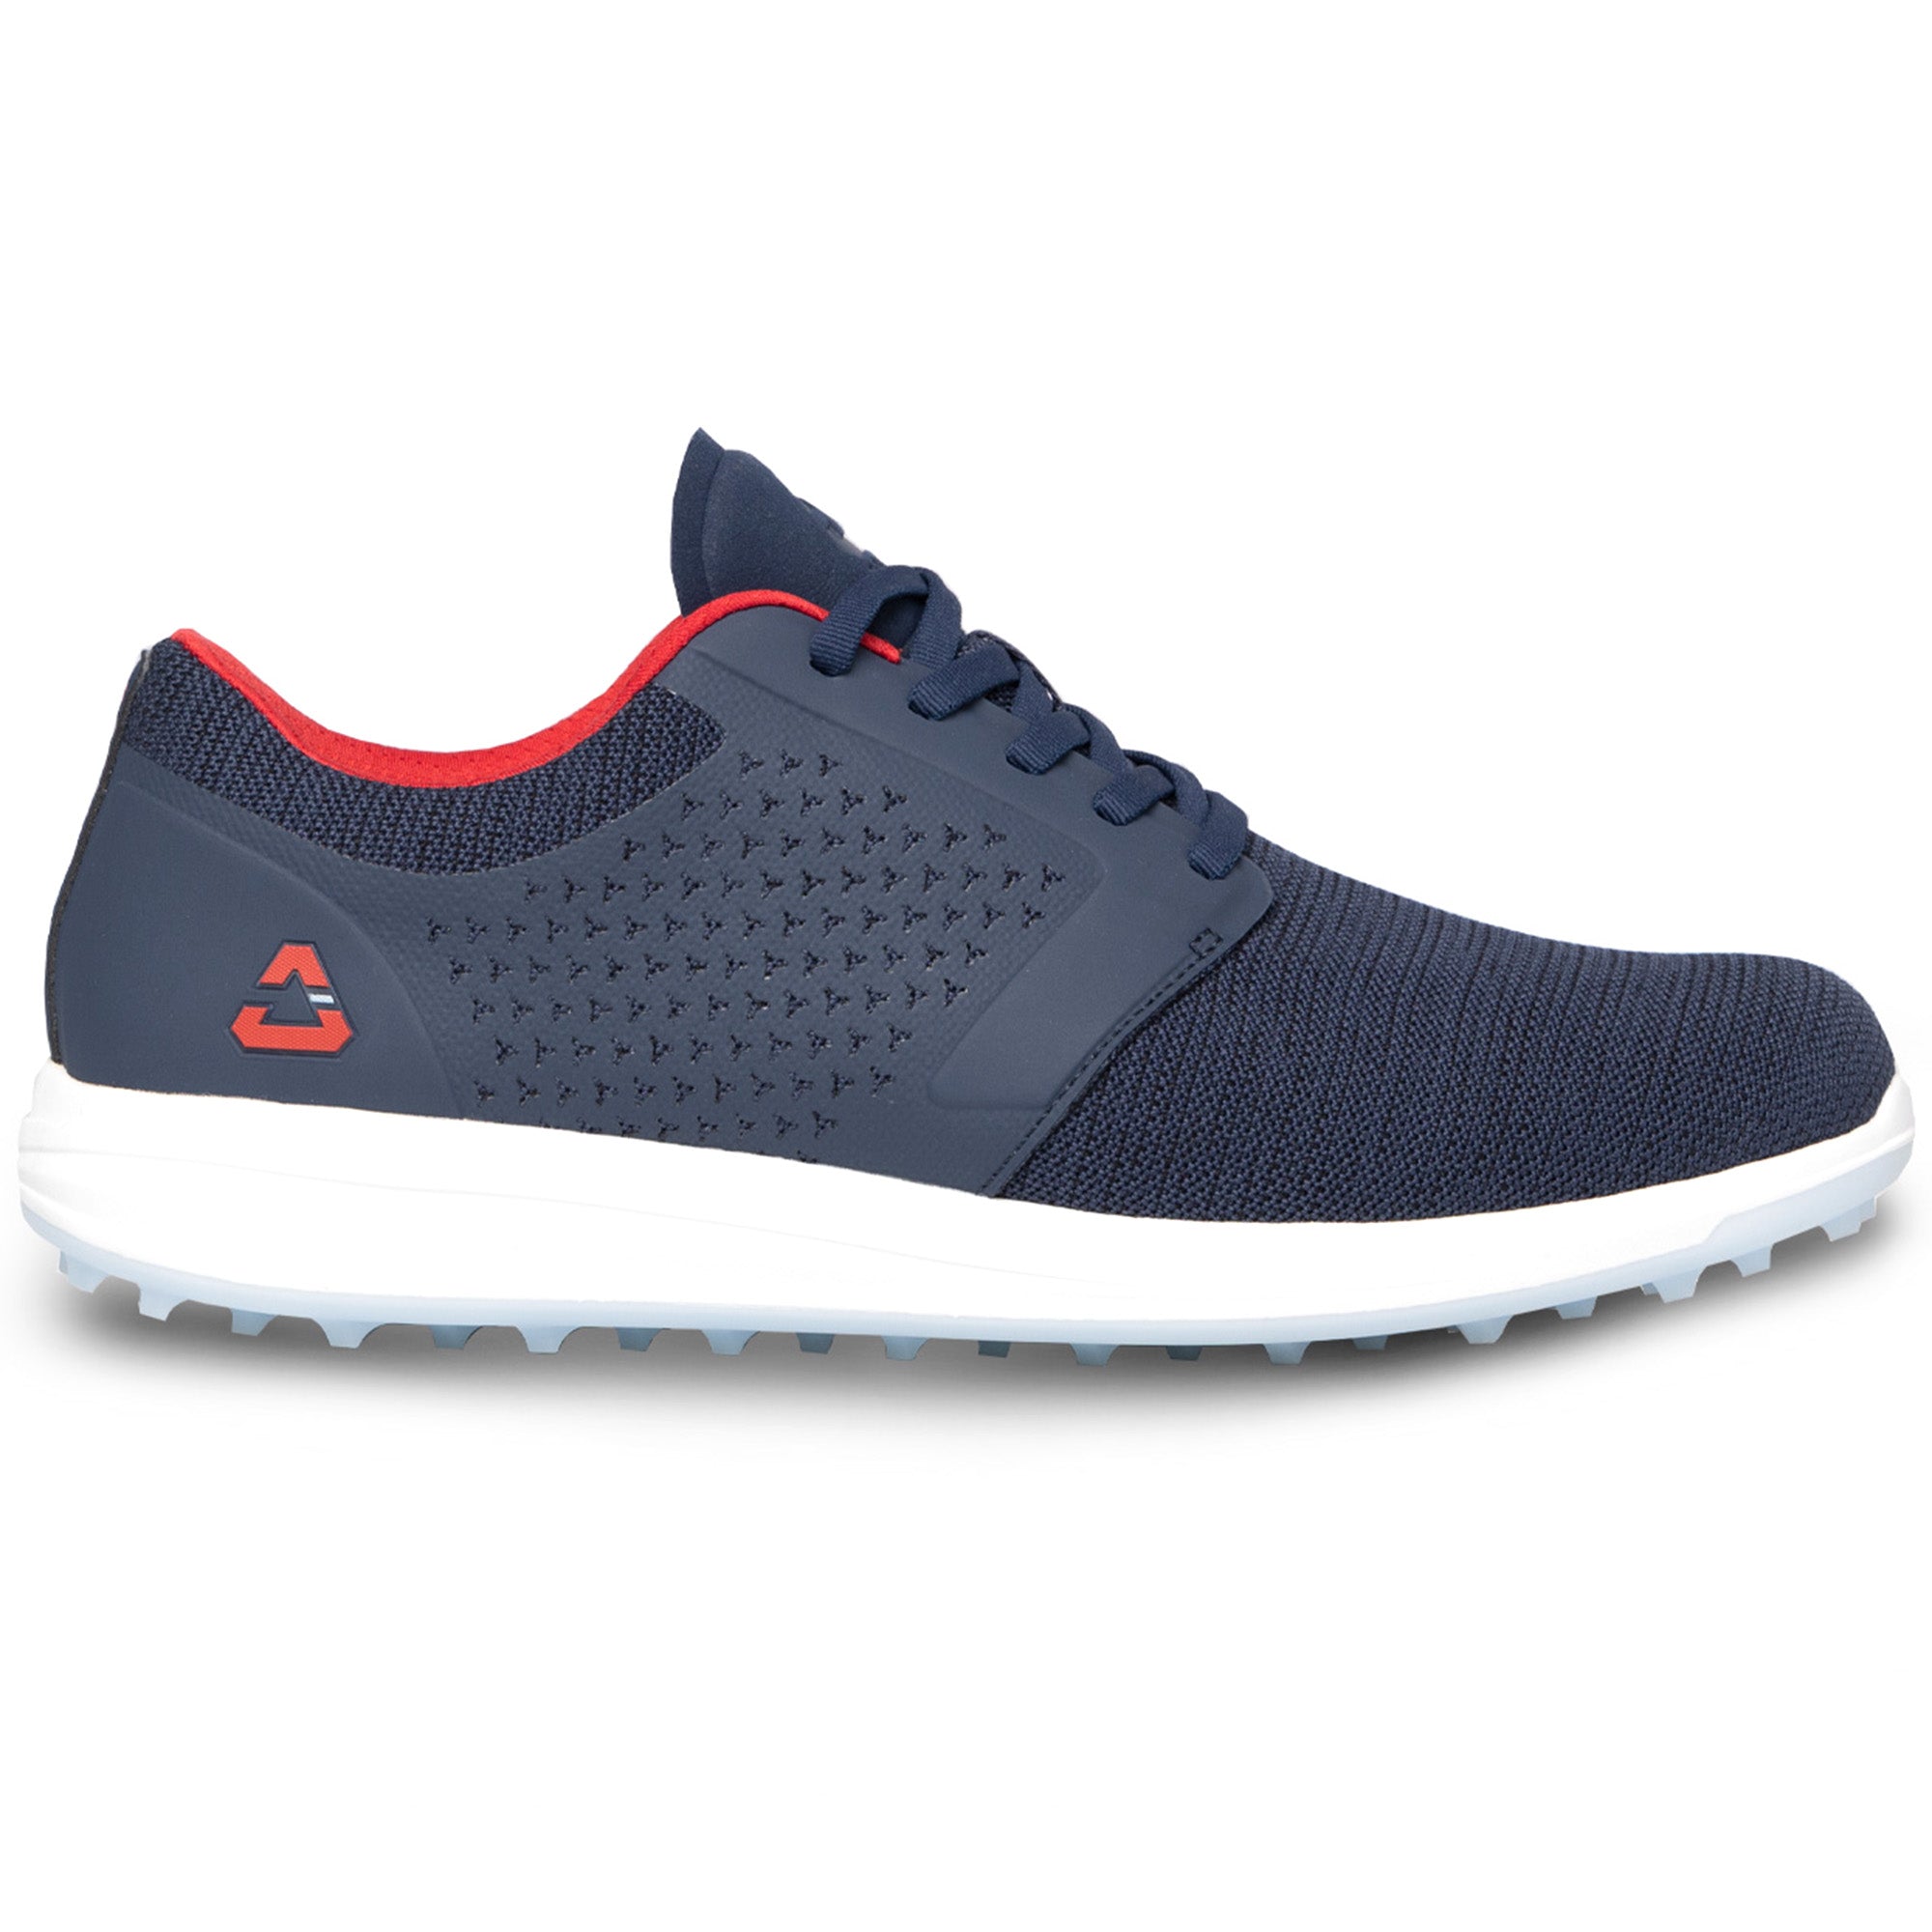 Cuater The Money Maker Golf Shoes 4MR216 Navy Red | Function18 ...